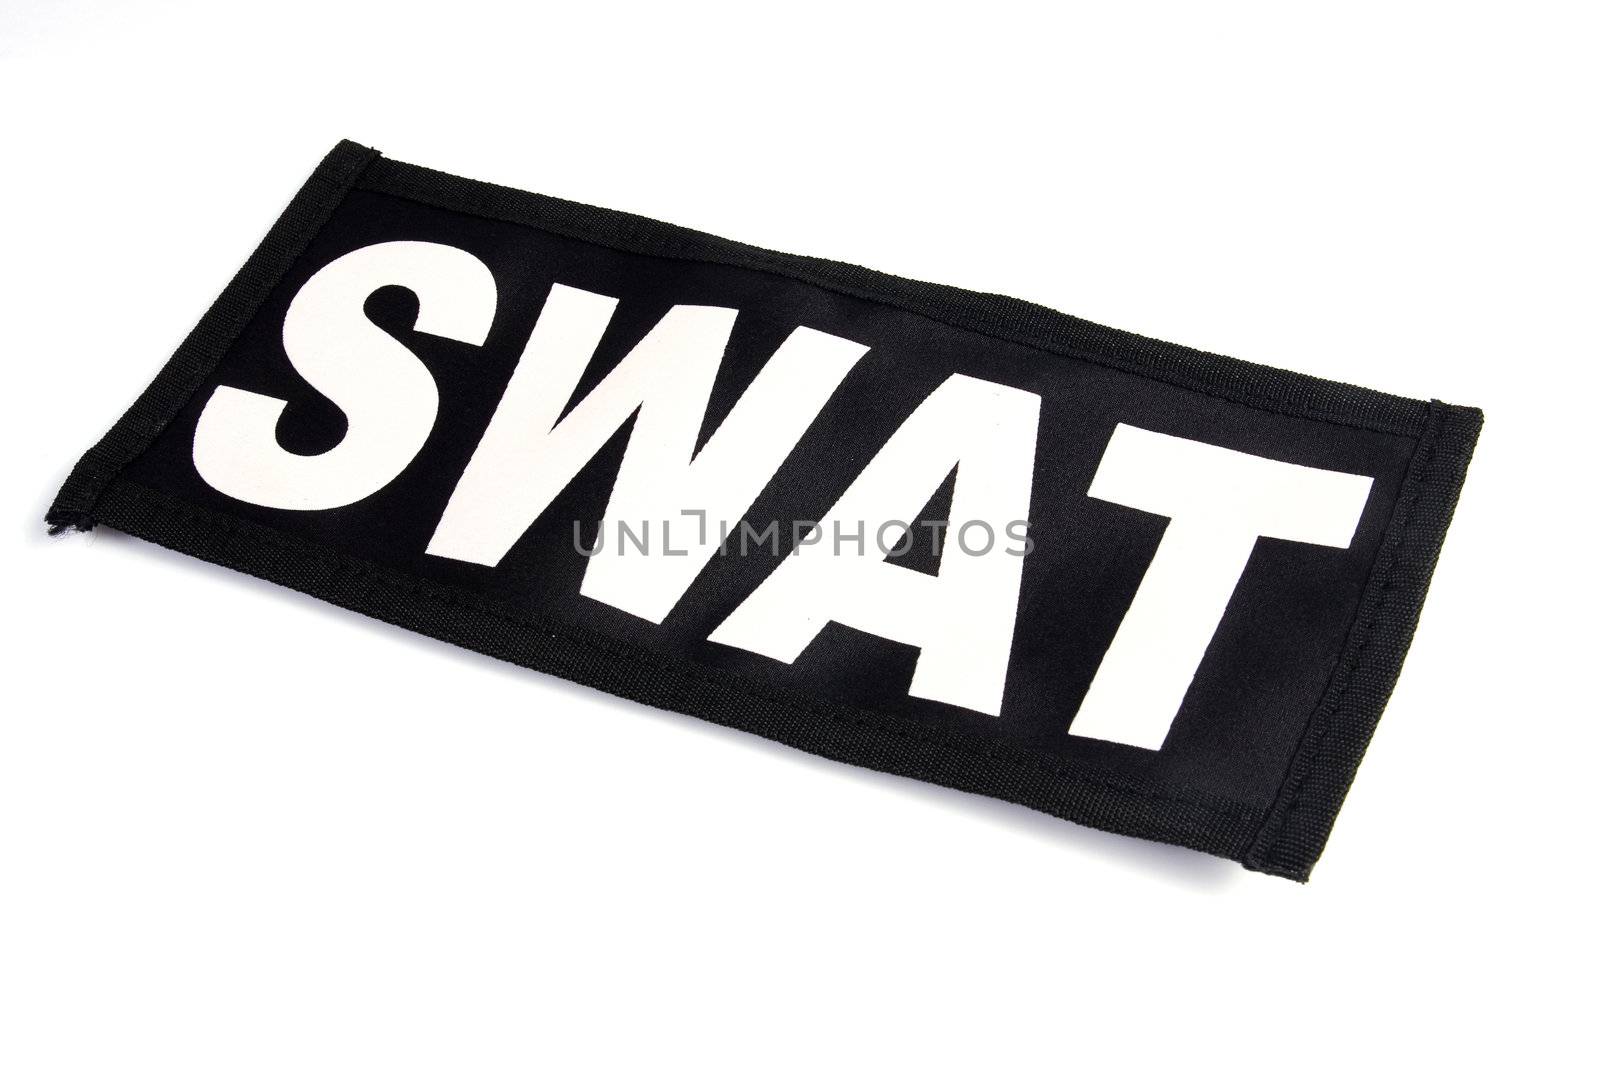 SWAT patch on the white background